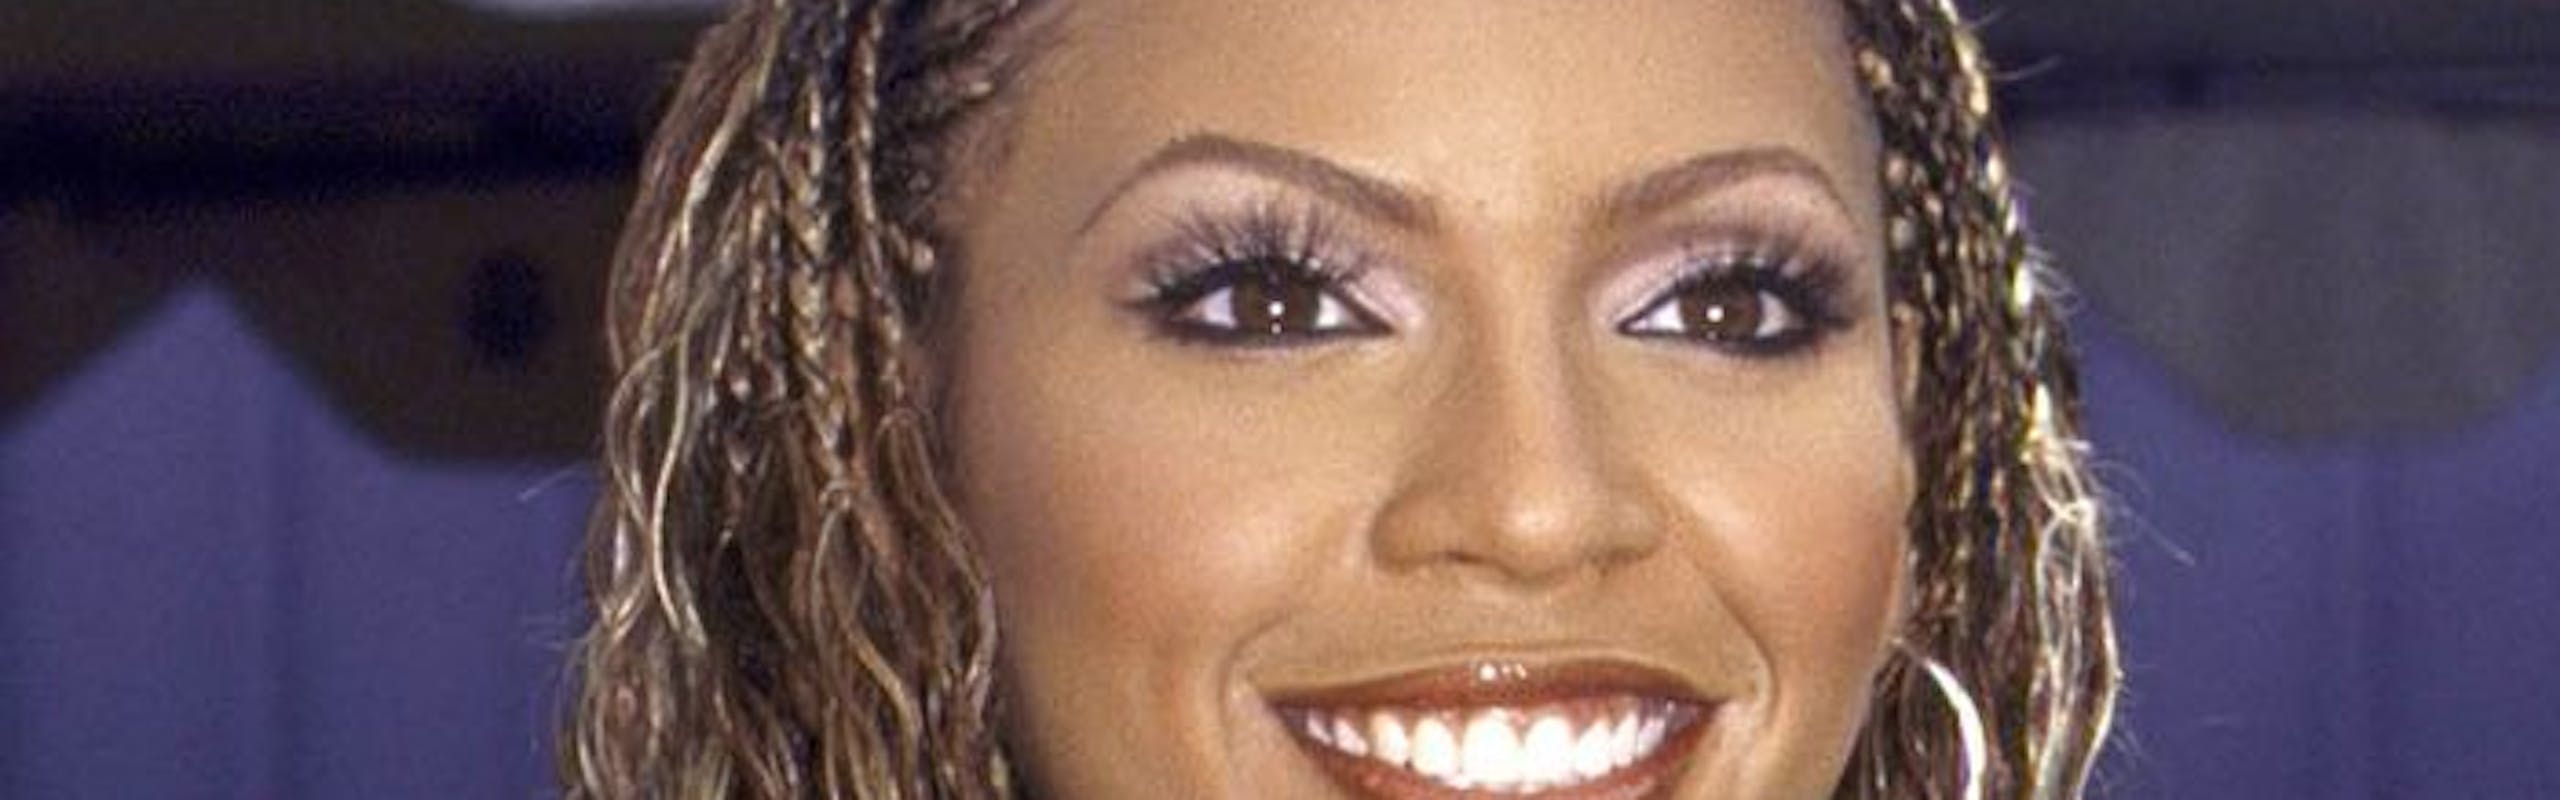 Beyonce in braids and smiling with brown lip liner and clear gloss.